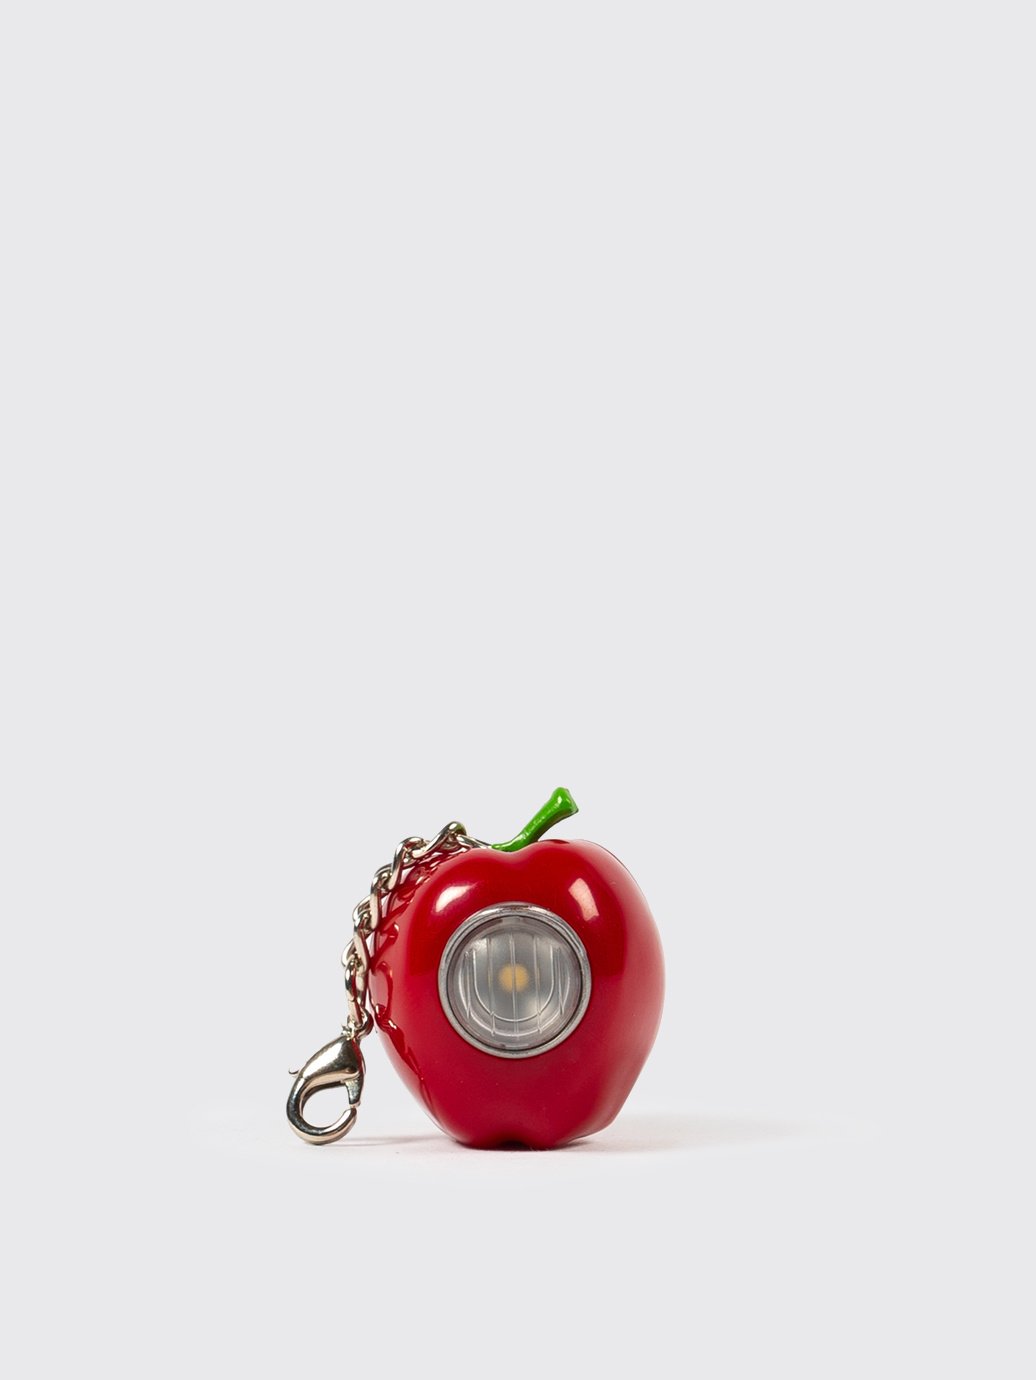 Medicom Toy x Undercover: Gilapple Key Chain Red